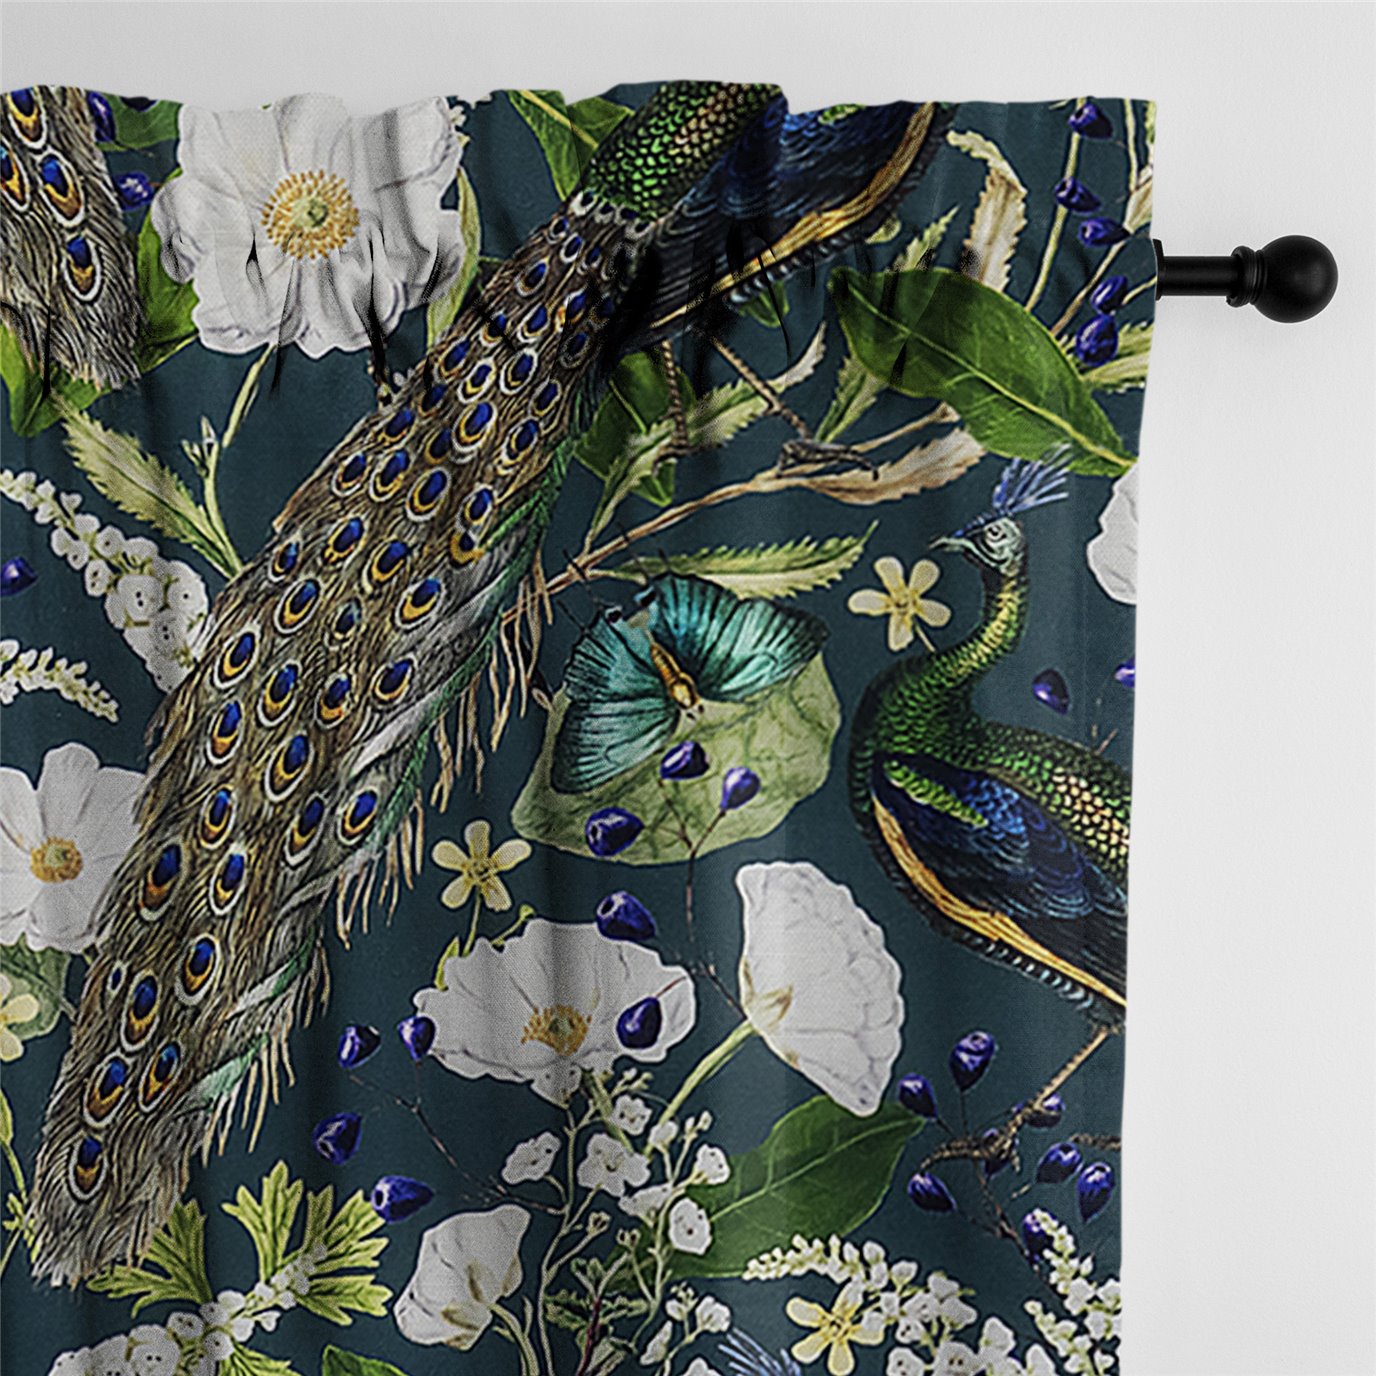 Peacock Print Teal/Navy Pole Top Drapery Panel - Pair - Size 50"x120"